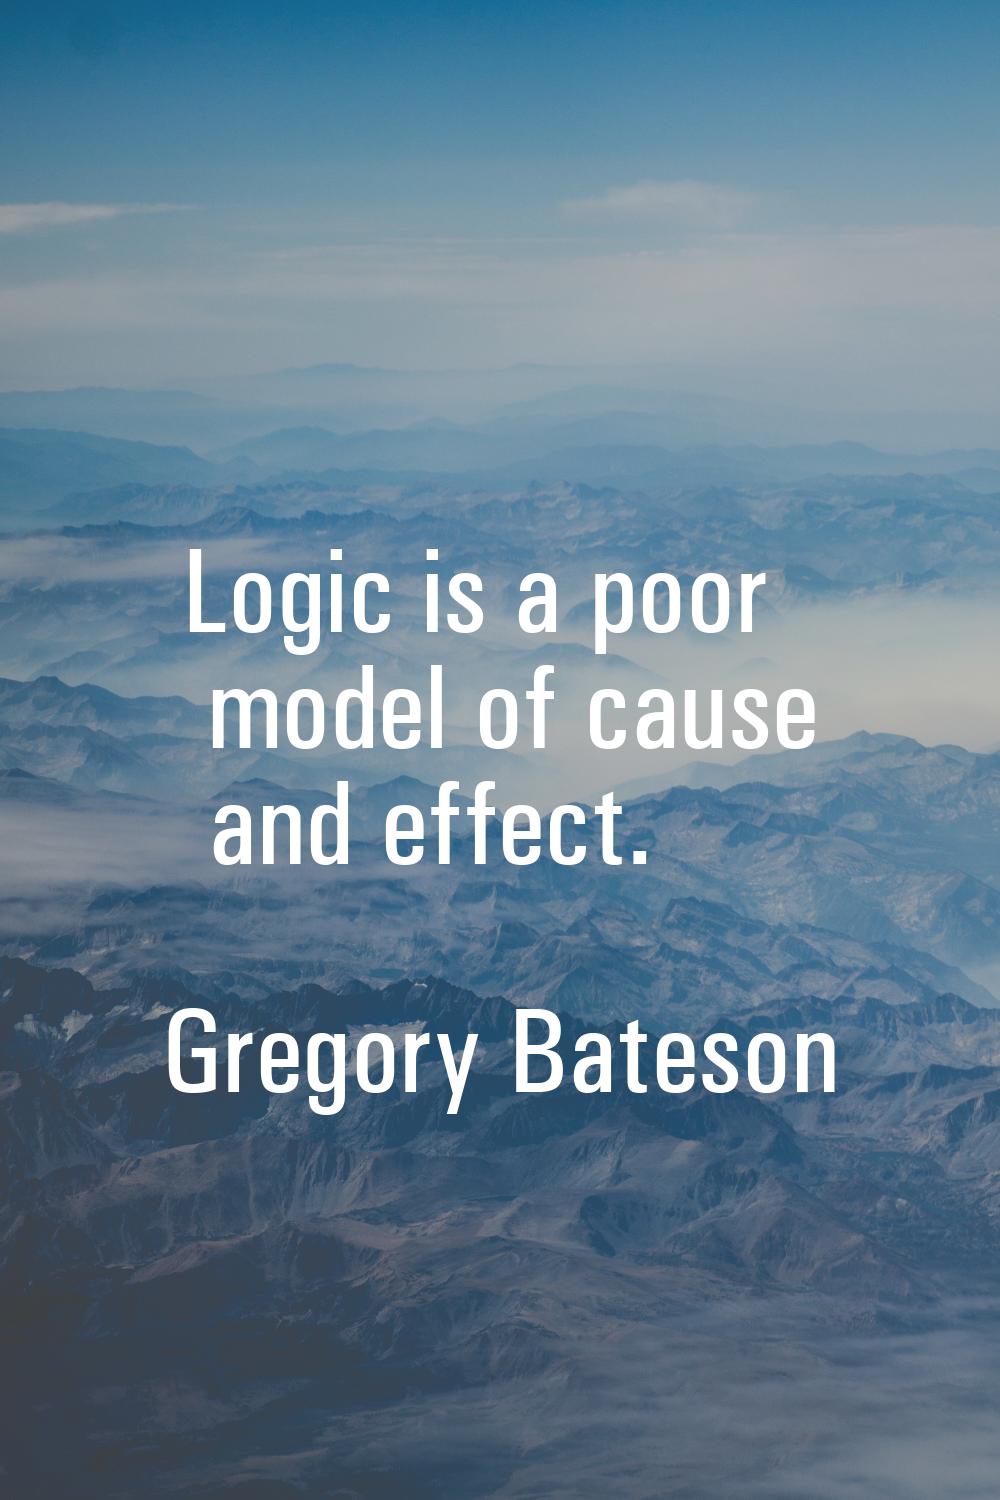 Logic is a poor model of cause and effect.